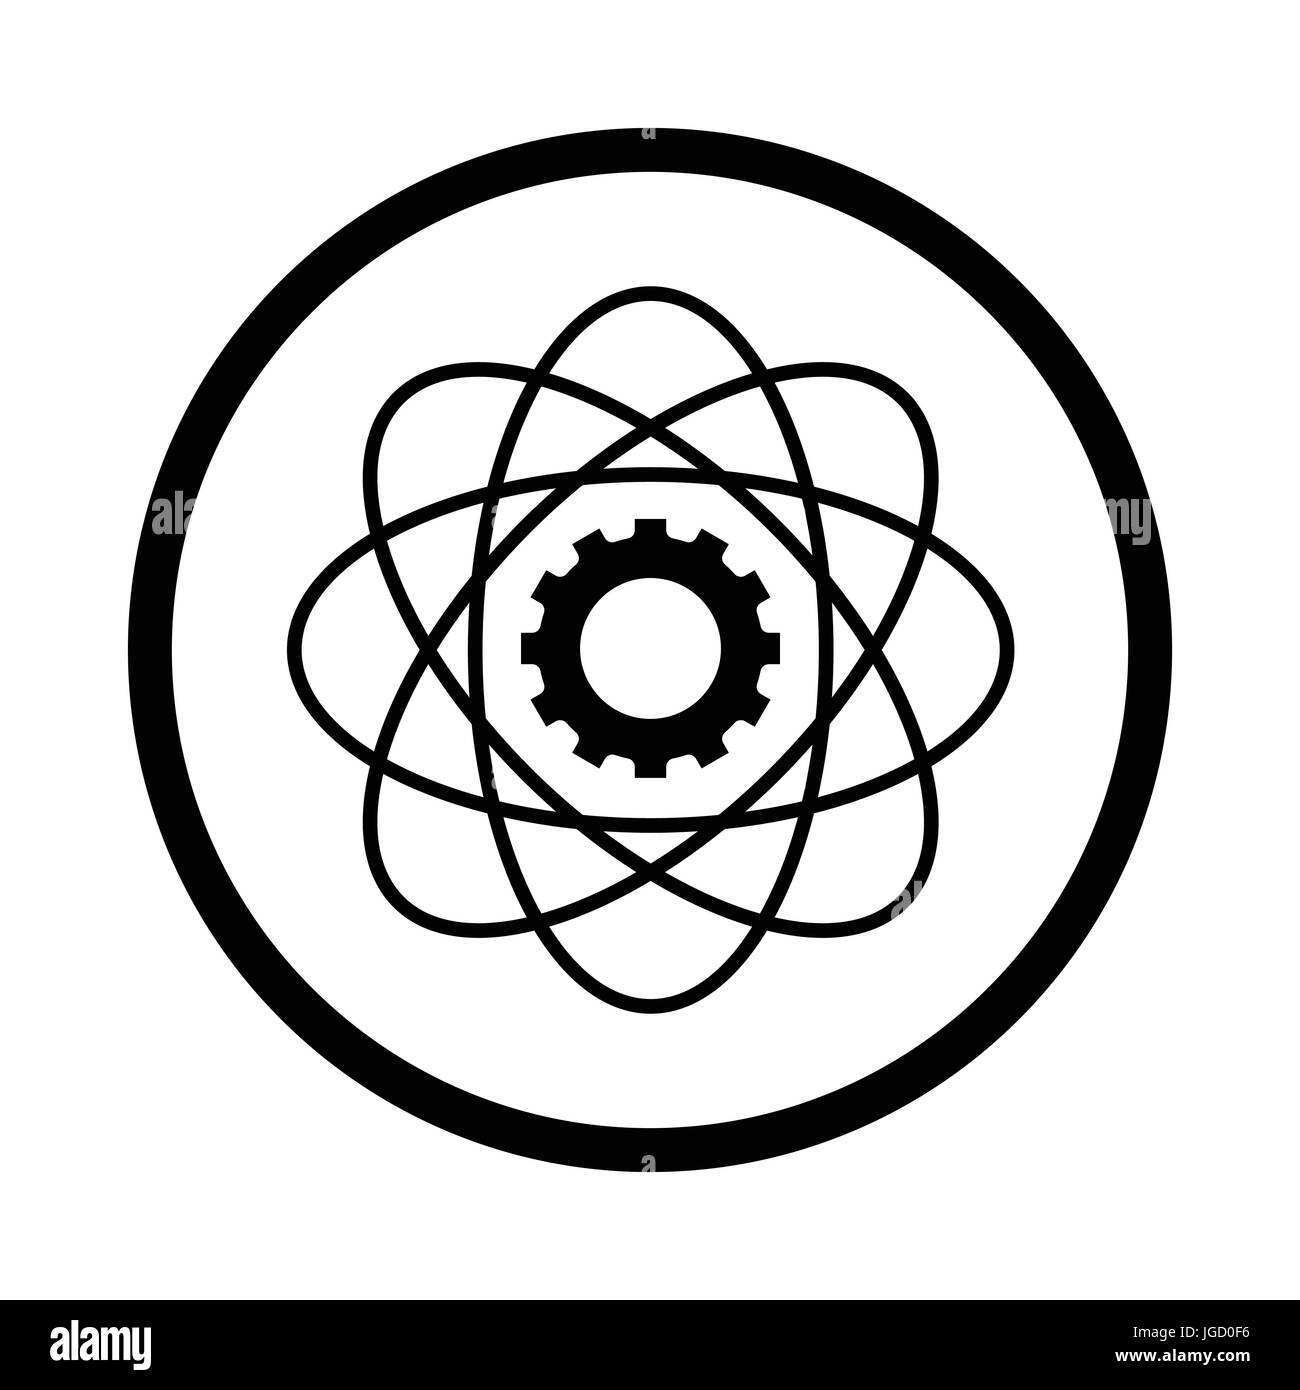 Science icon, iconic symbol inside a circle, on white background. Vector Iconic Design. Stock Vector